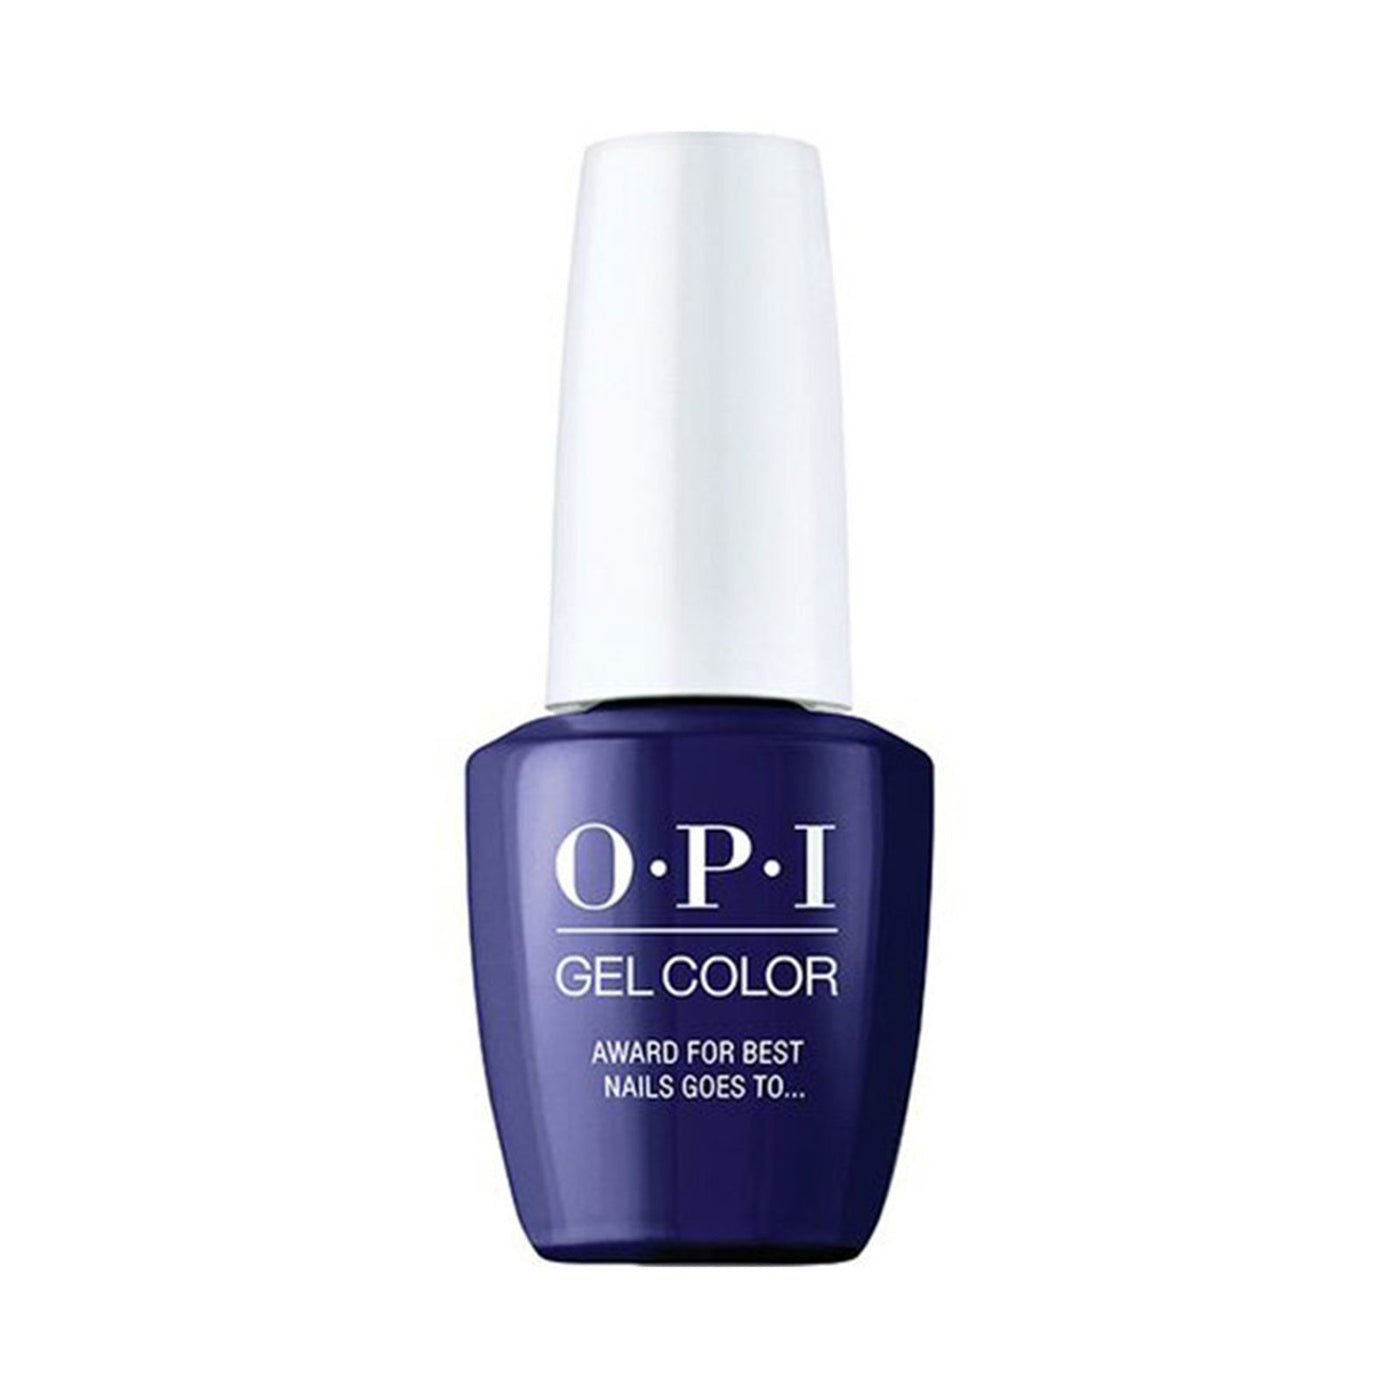 OPI GelColor GCH009 Award for Best Nails goes to… 15ml